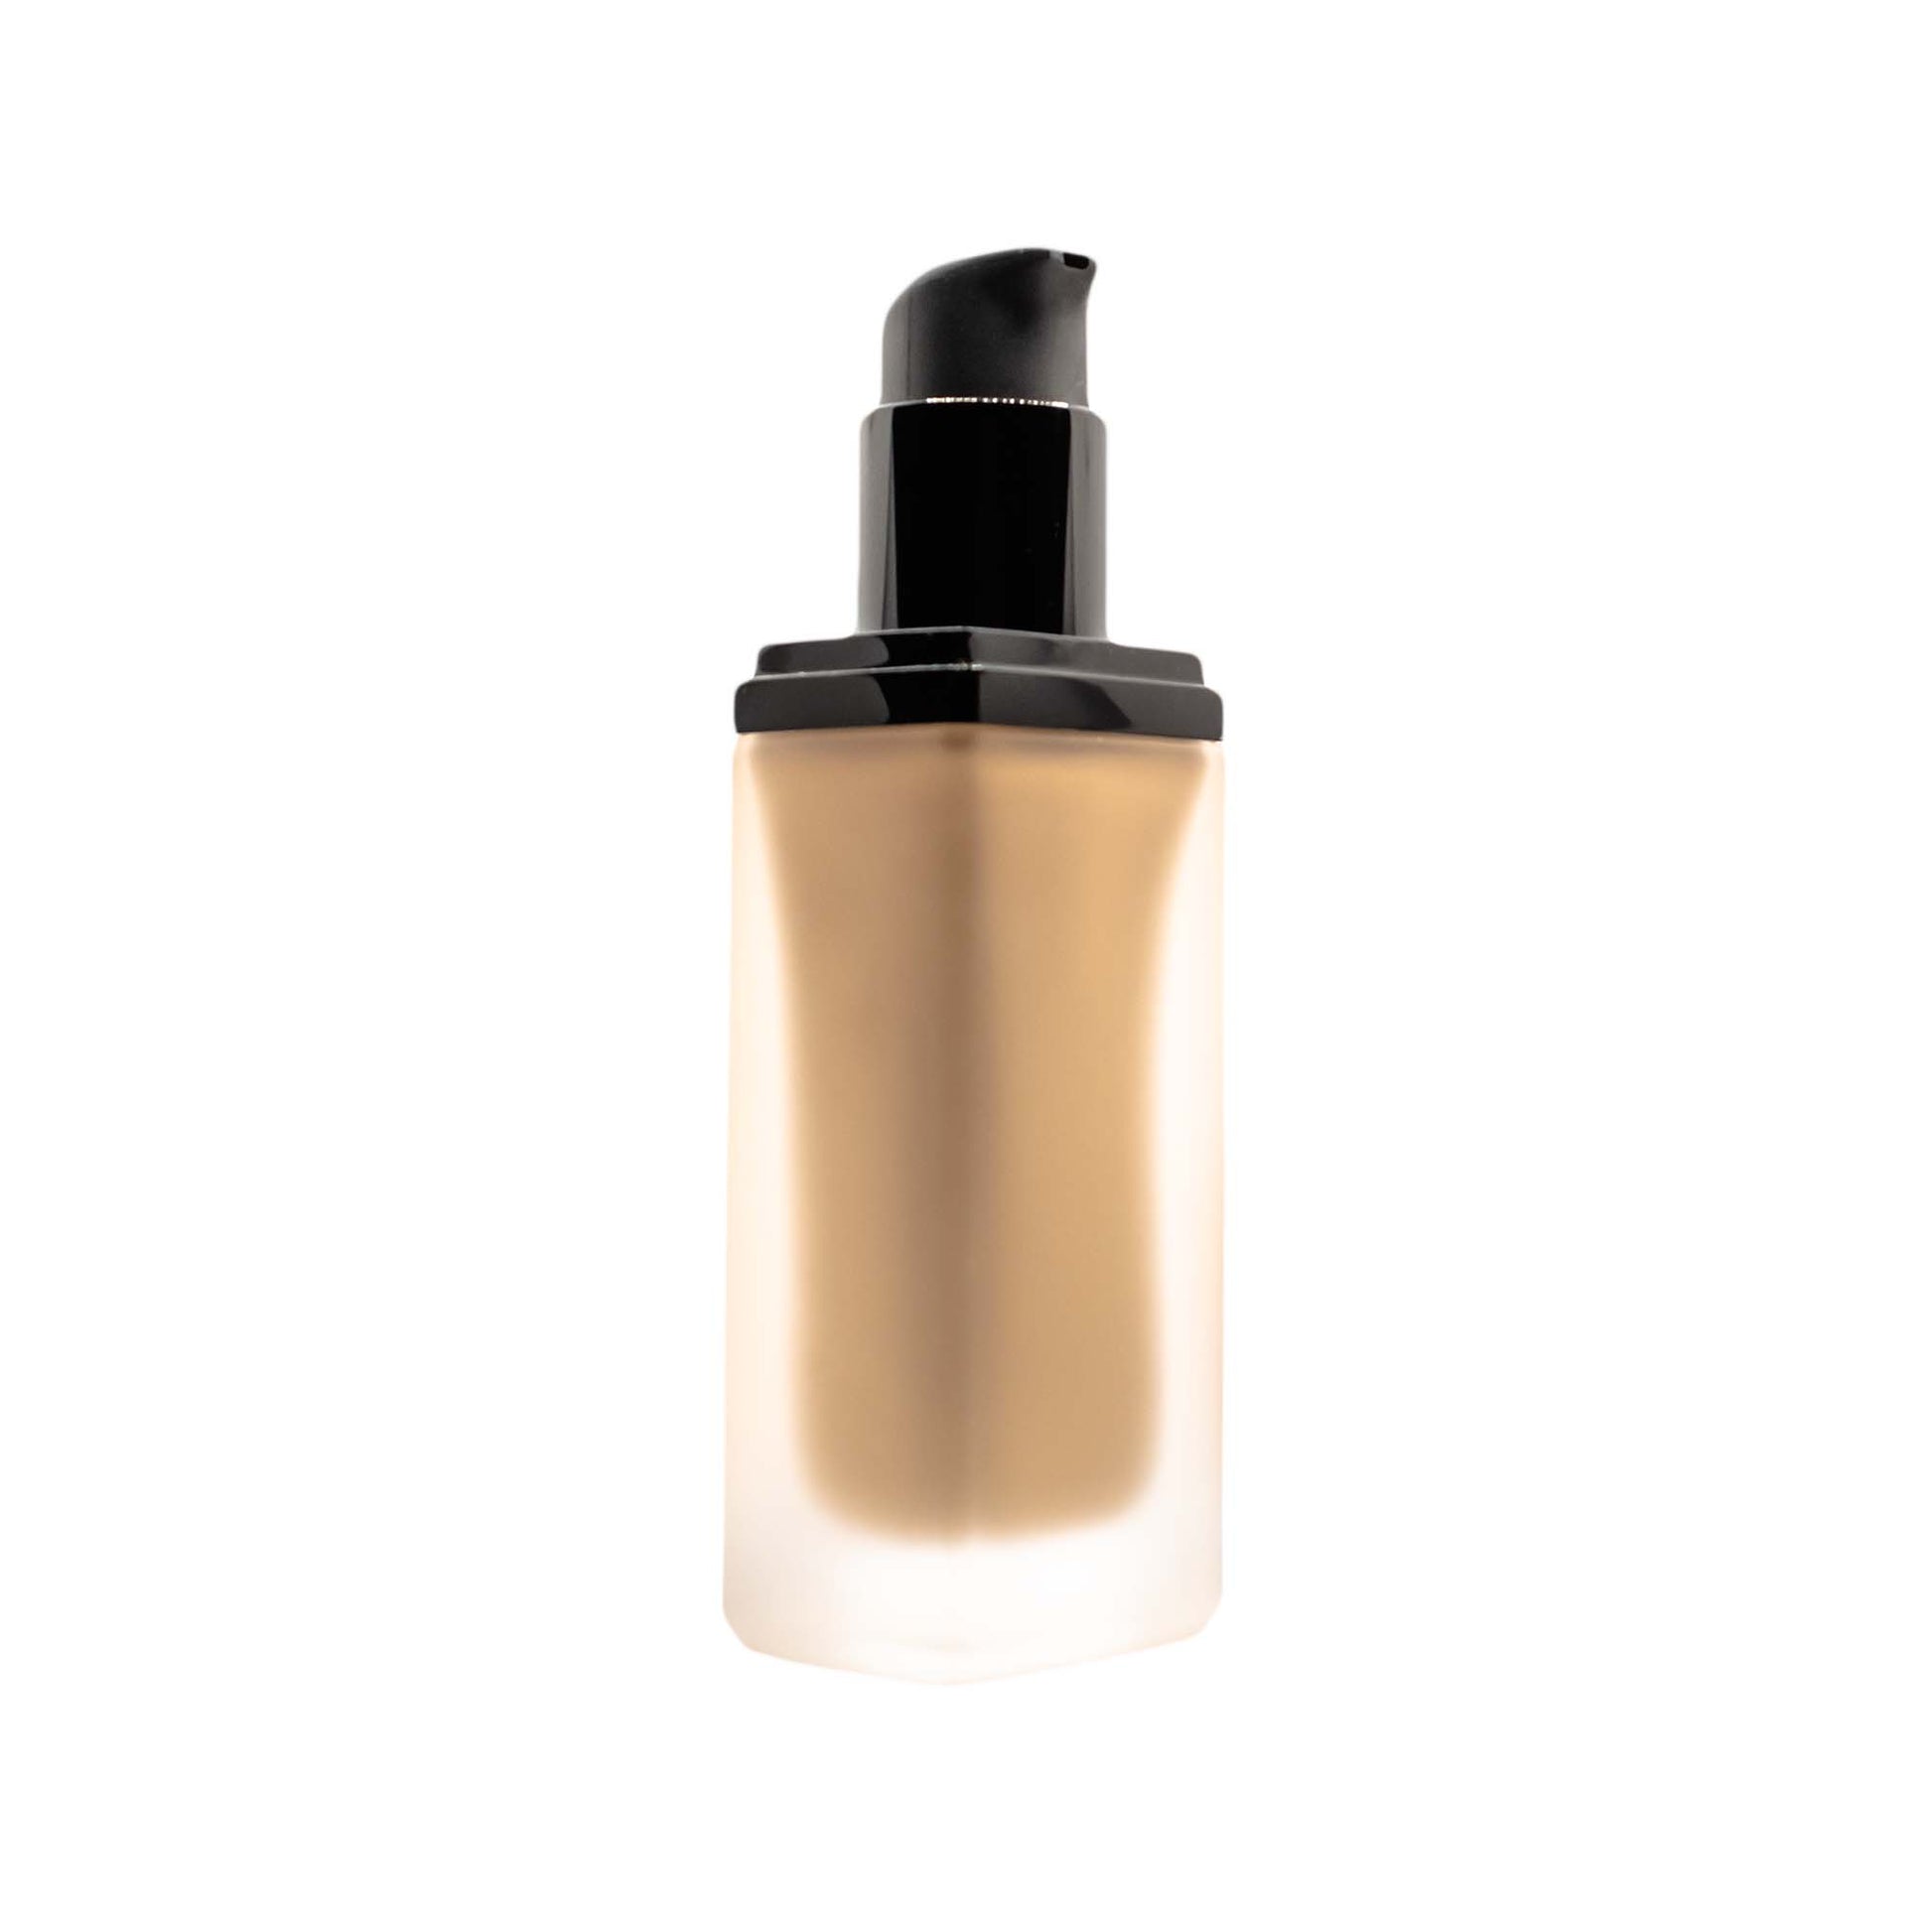 Amber Foundation by Cruisin Organics is non-acnegenic and has SPF protection. This vegan foundation is perfect for those looking for a gentle, ethical accessory.